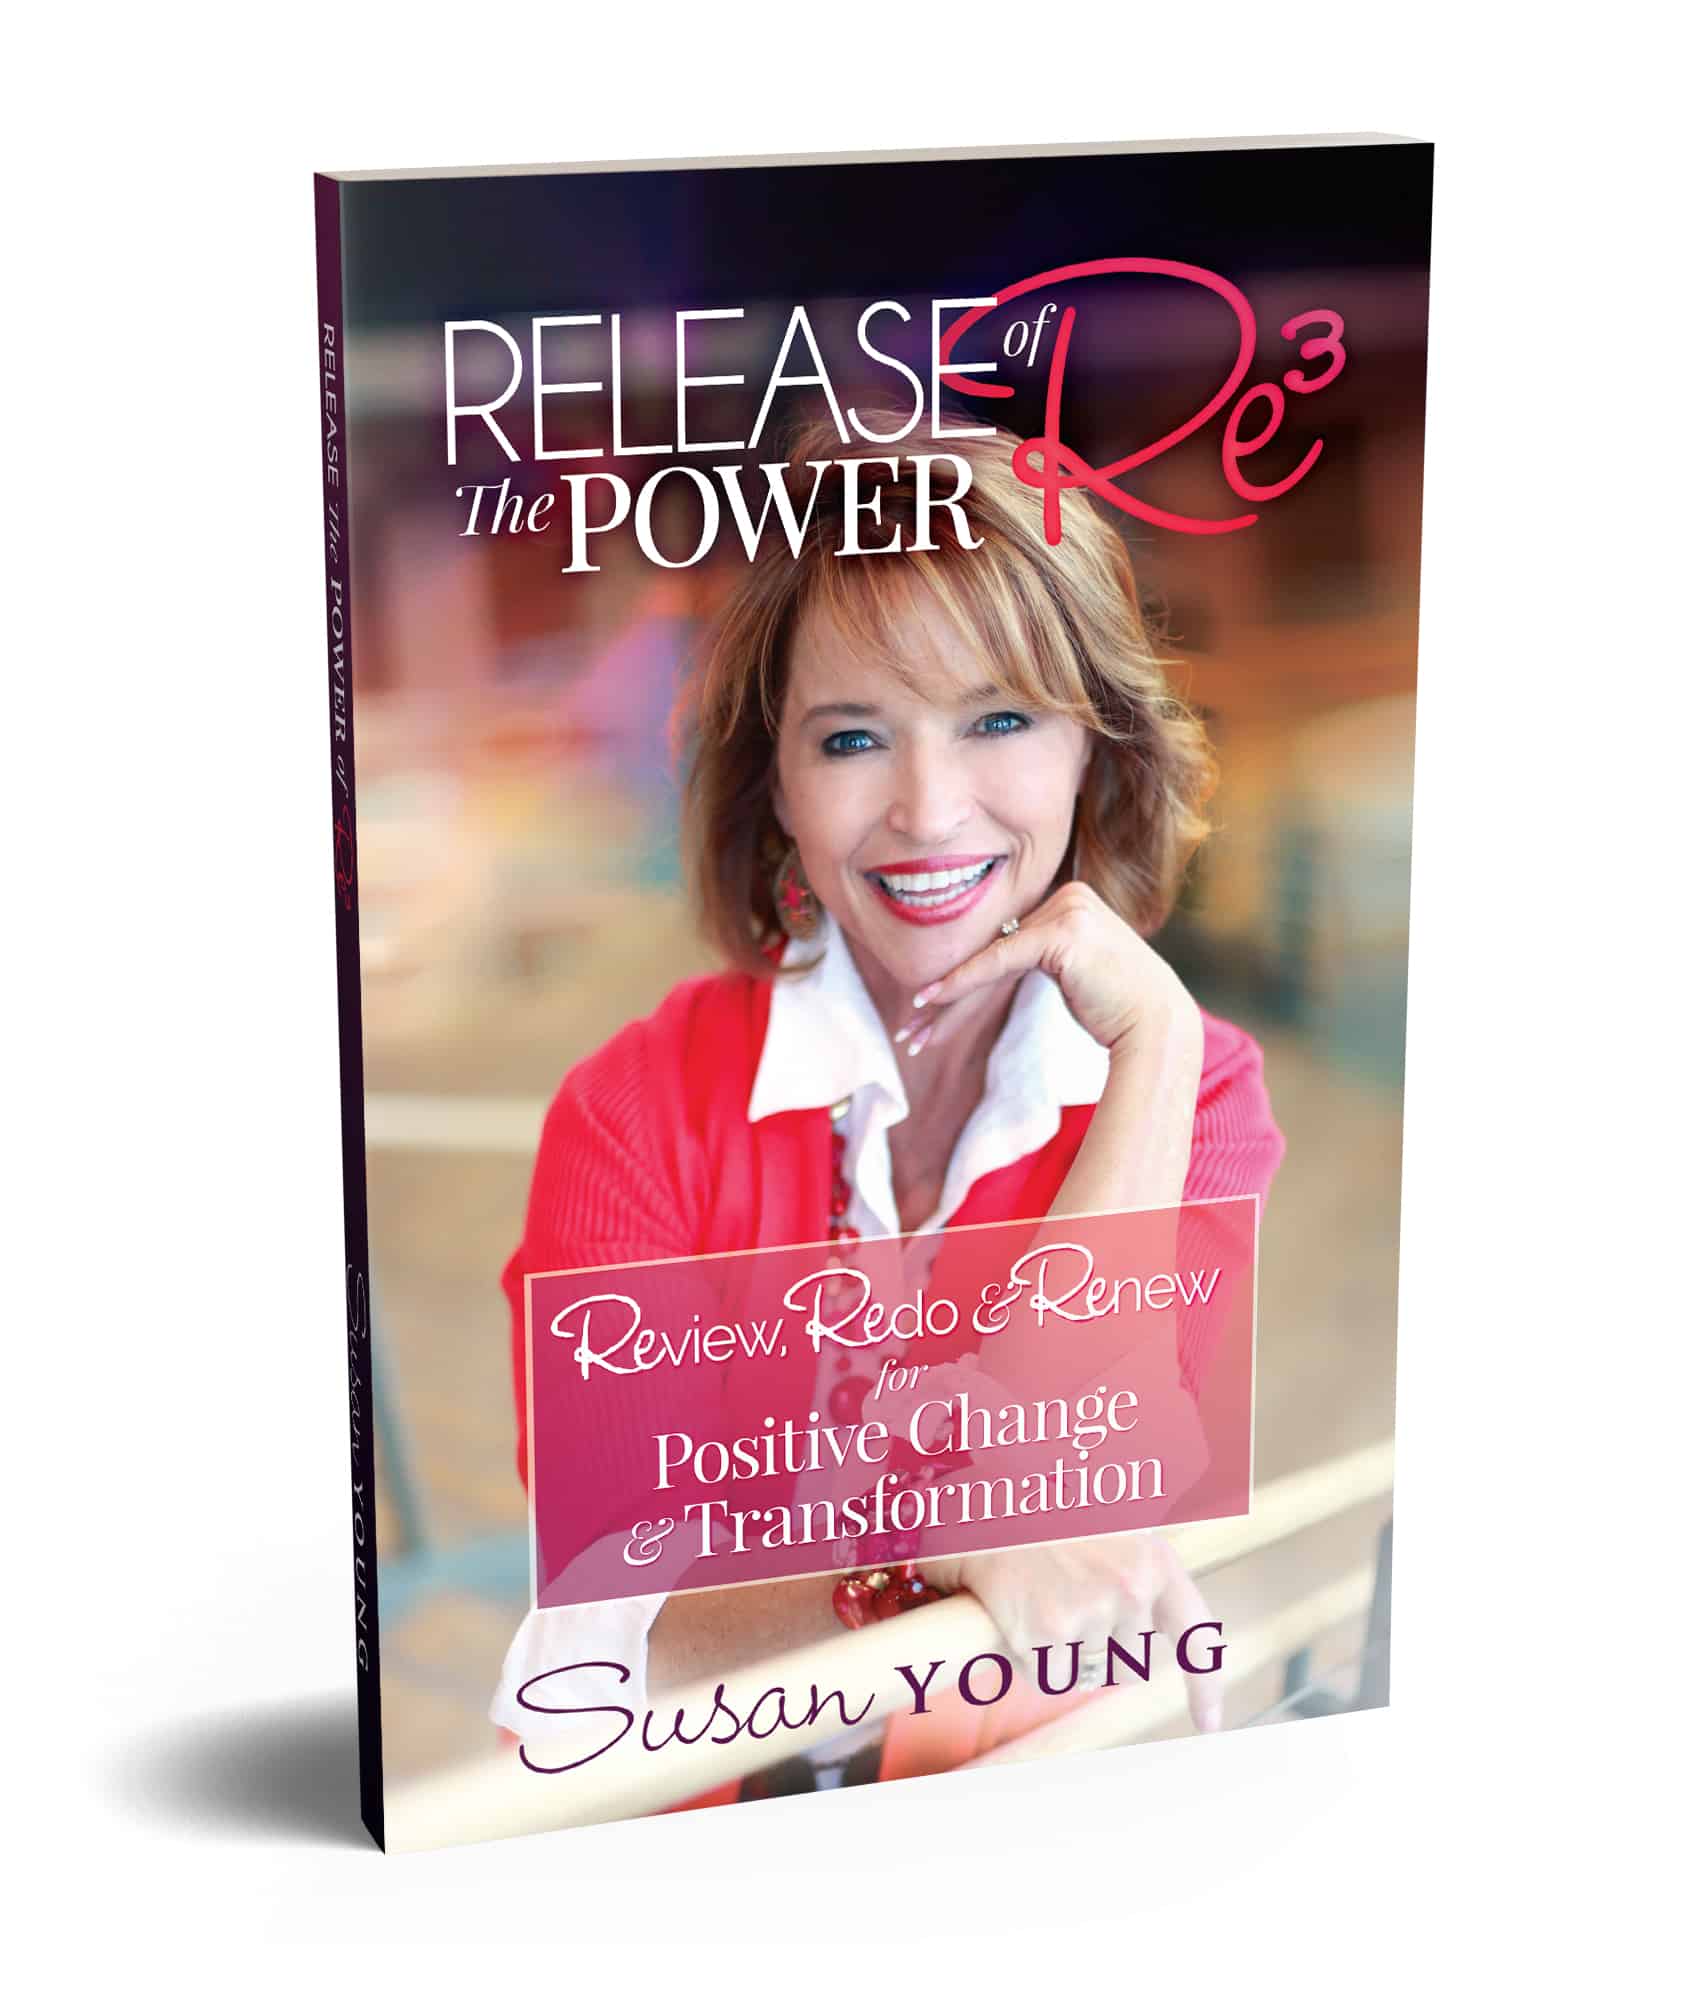 Store for Release the Power of Re3: Review, Redo & Renew for Positive Change & Transformation book by Susan Young